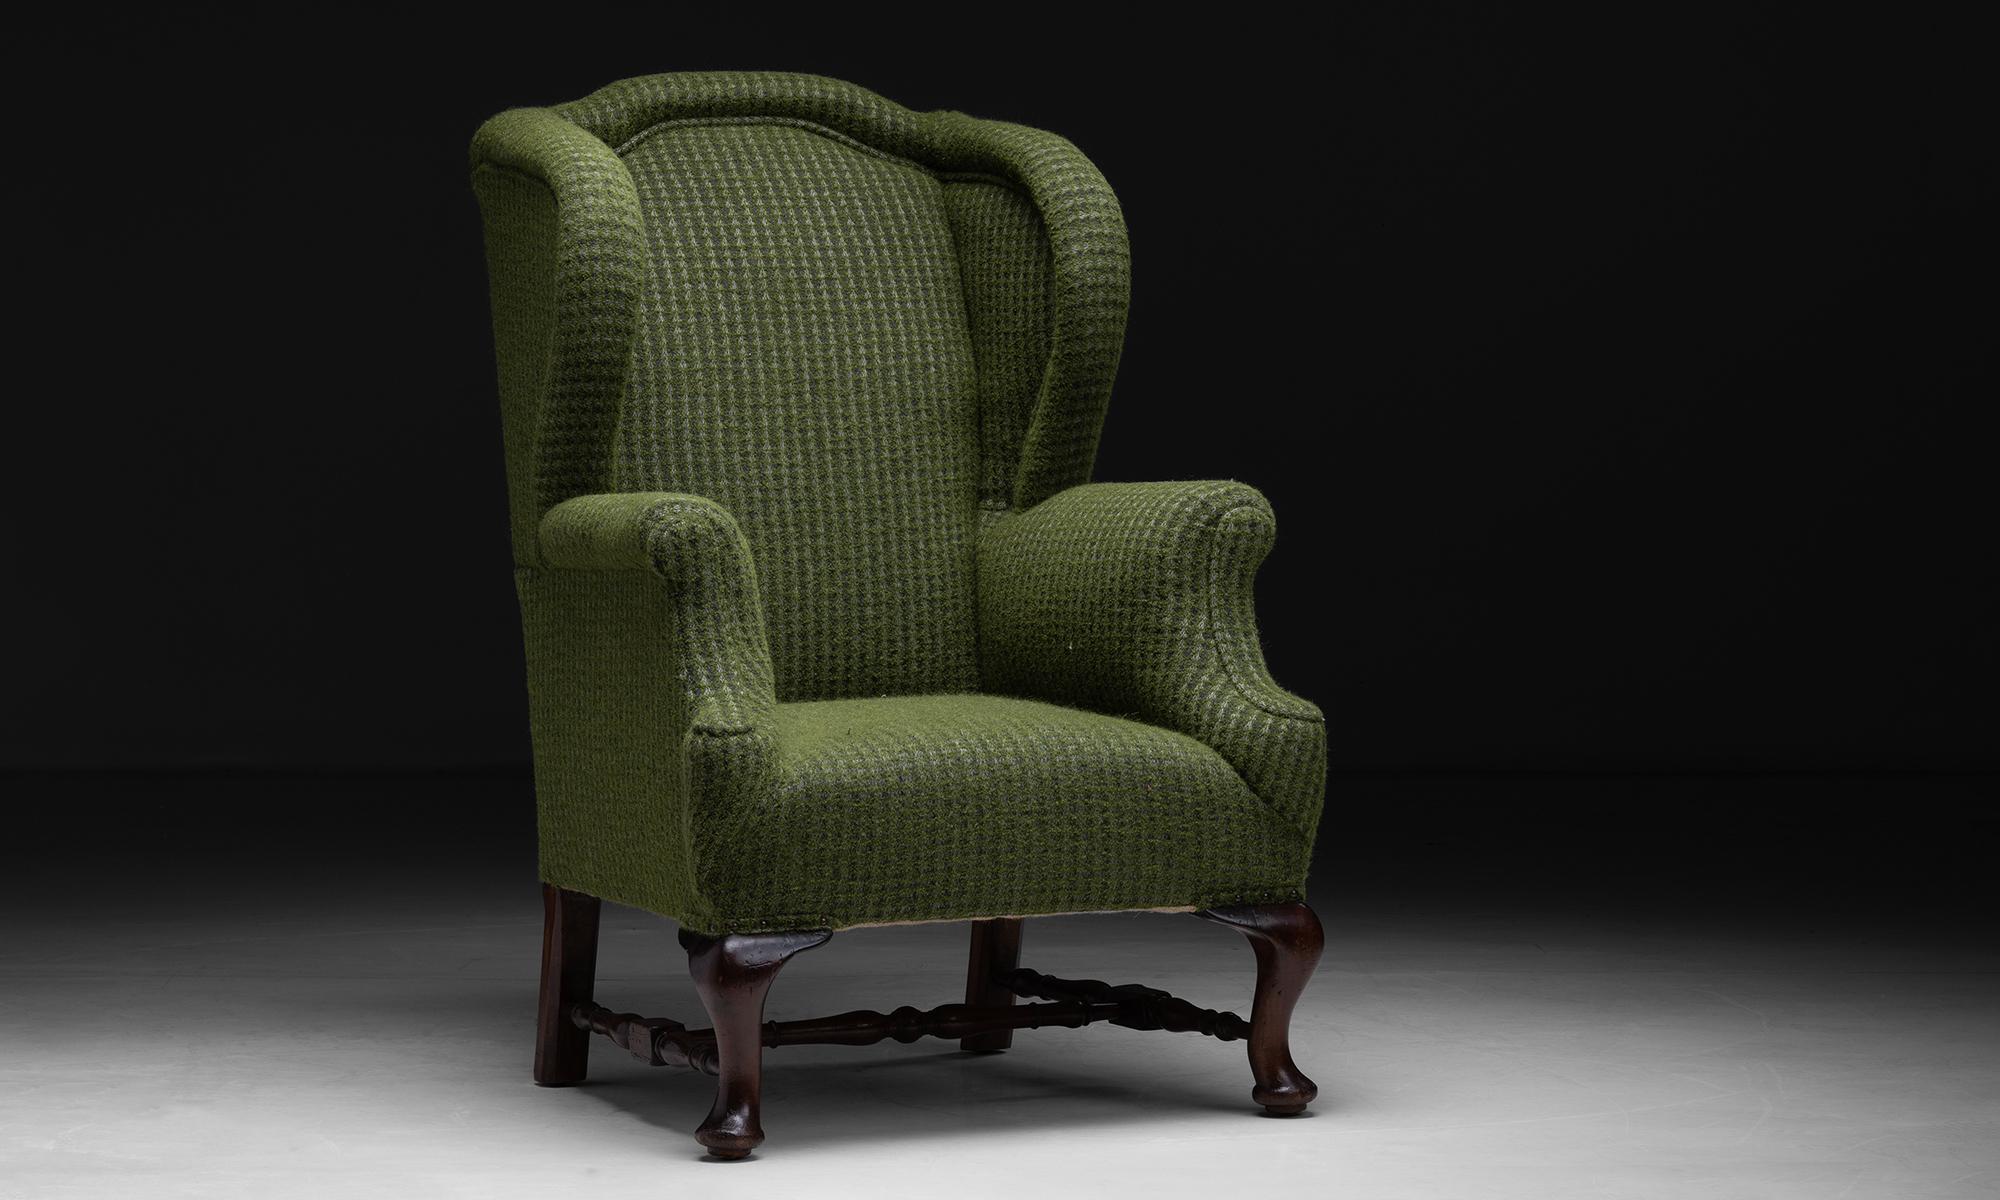 Wingback Armchair by William Birch, England circa 1890

Newly upholstered in Pine Wool Blend by Holland & Sherry on cabriole mahogany legs with makers stamp.

Measures: 30”W x 33”D x 46.75”H x 17”seat.